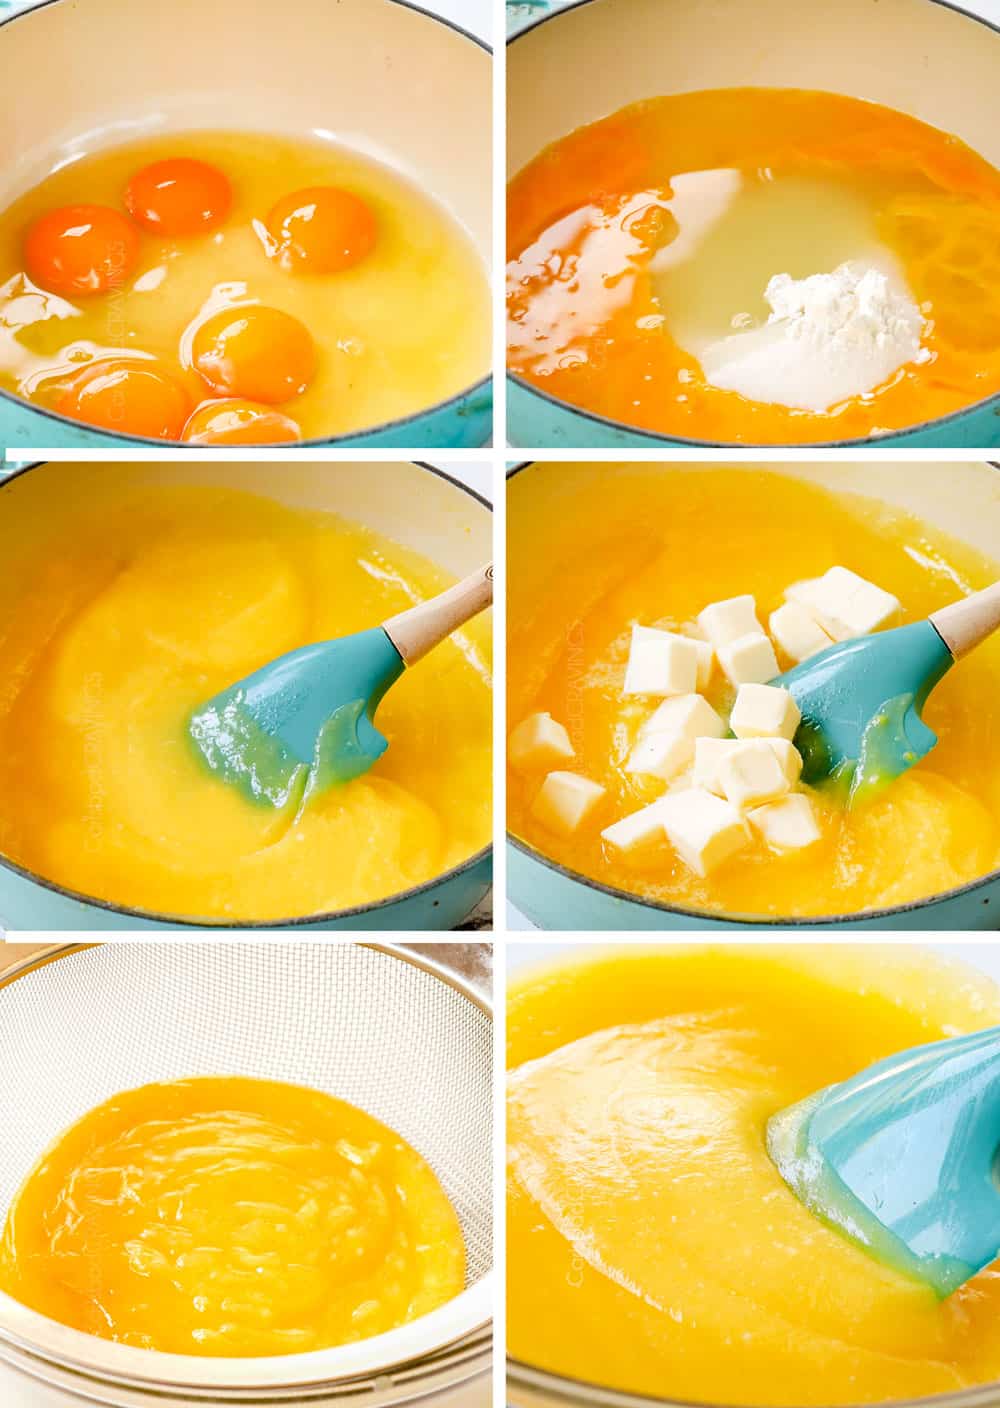 a collage showing how to make lemon cake by making lemon curd by 1) adding eggs, 2) adding lemon juice, sugar and lemon zest, cooking until thickened, adding butter, straining through a fine mesh sieve